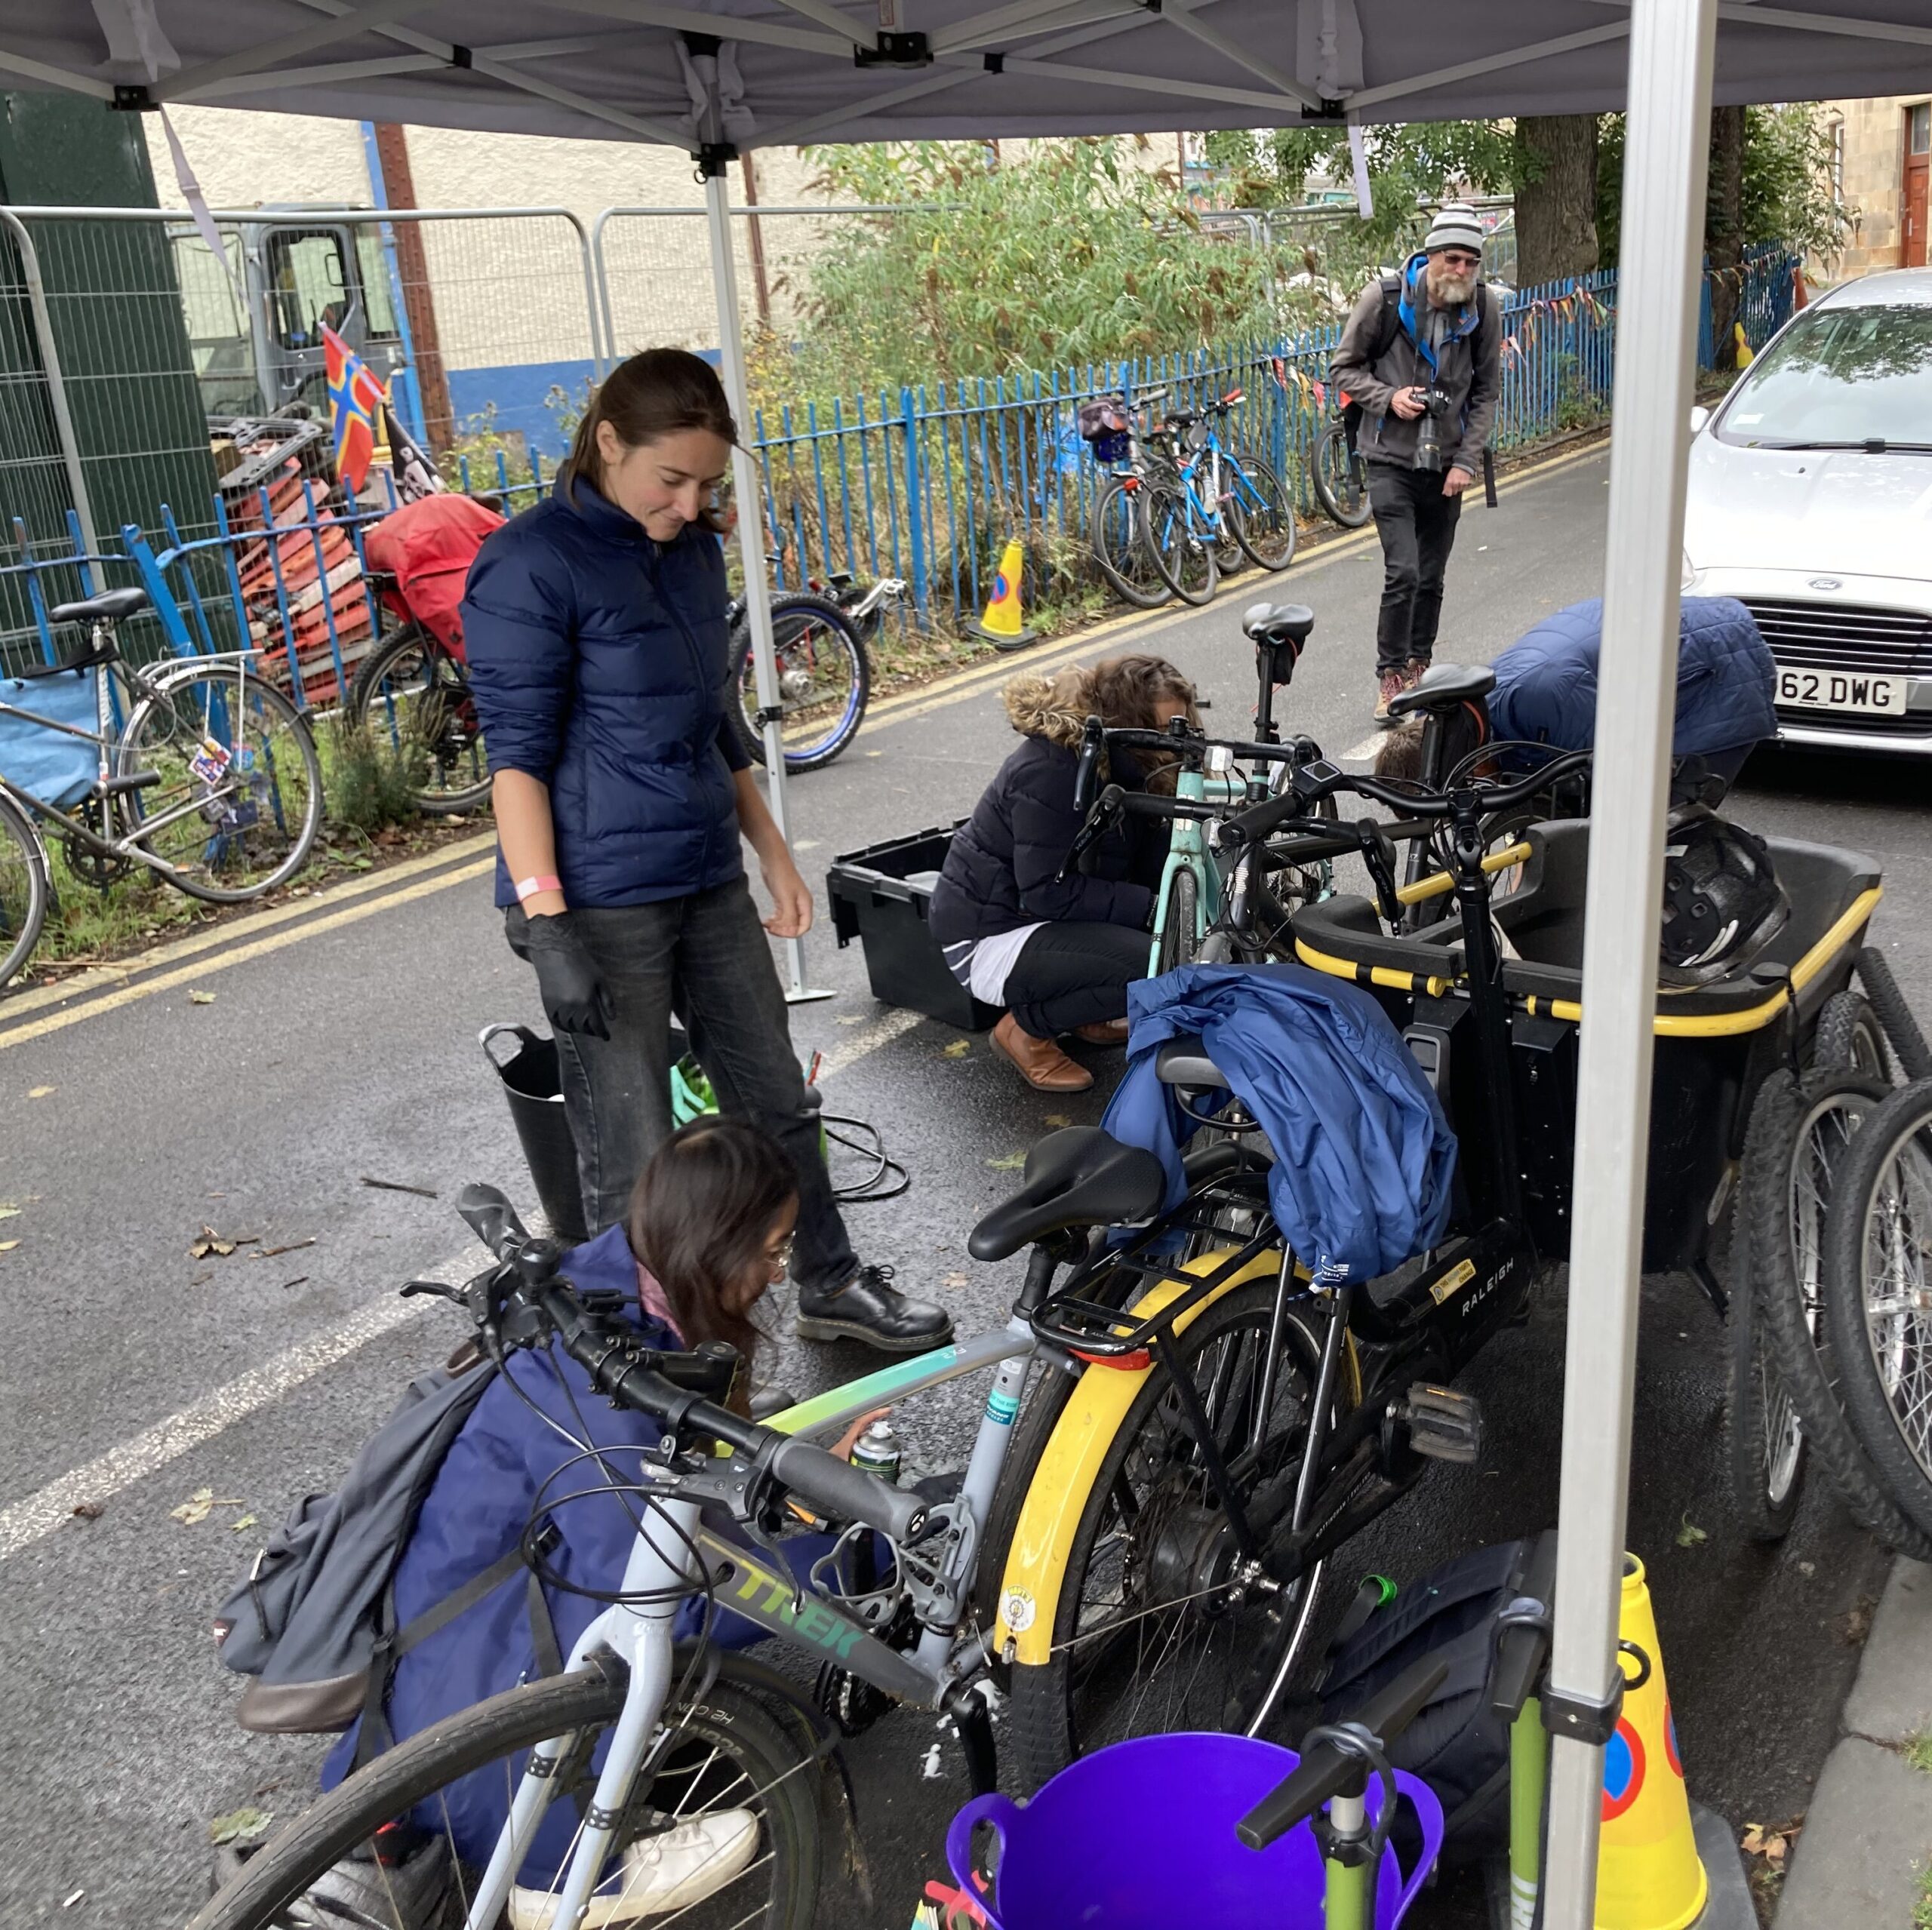 Volunteer assisting two workshop attendees at an outdoor cycle maintenance event.